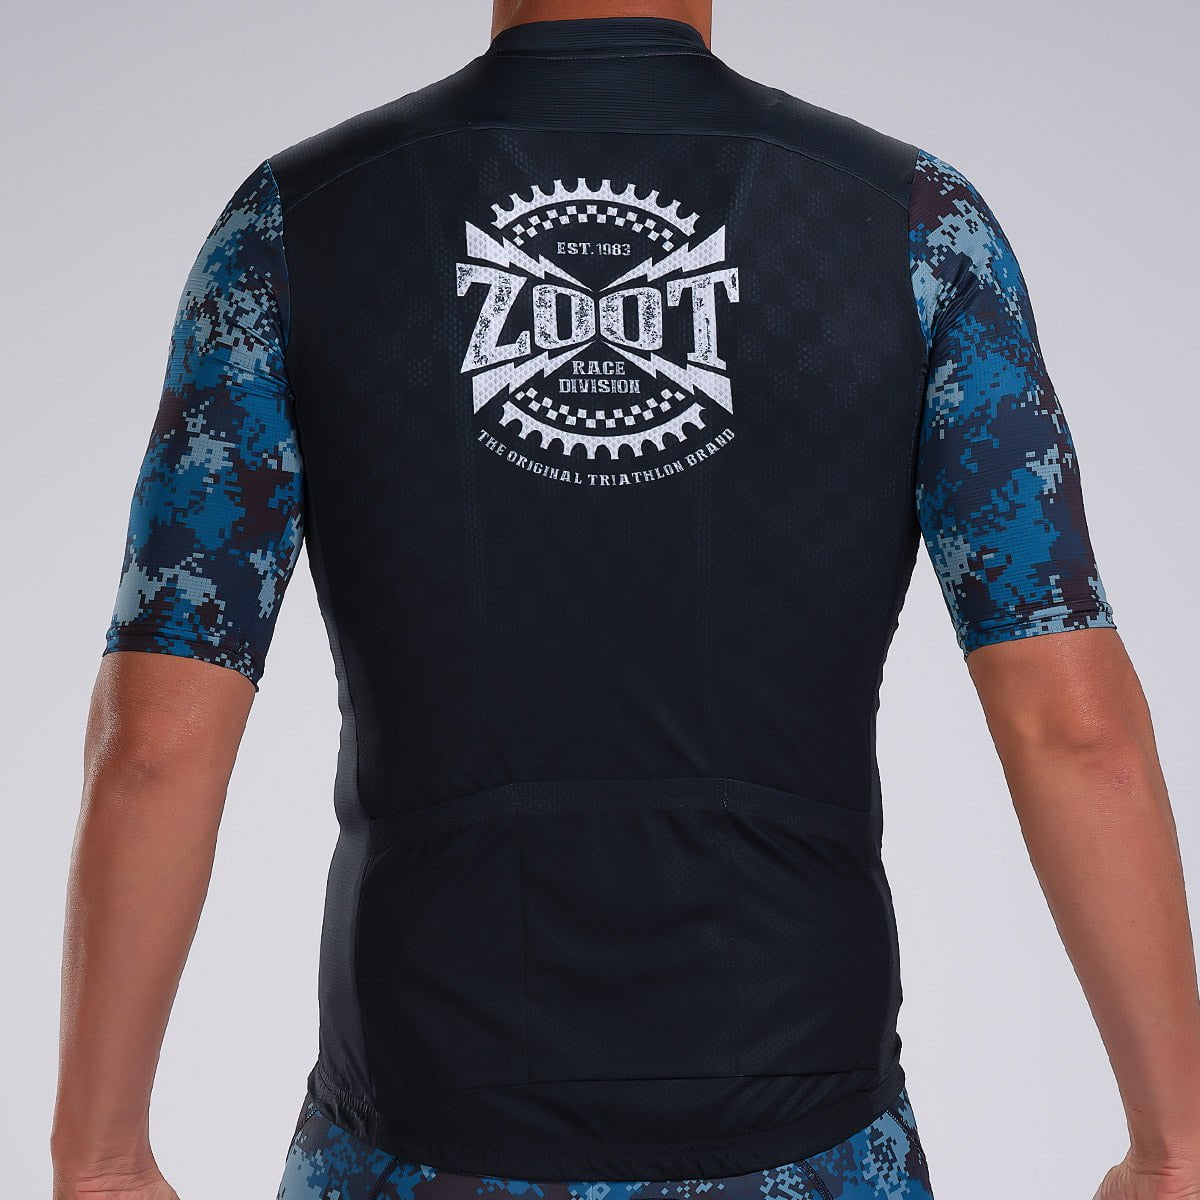 Zoot Sports CYCLE TOPS MENS LTD CYCLE AERO JERSEY - RACE DIVISION